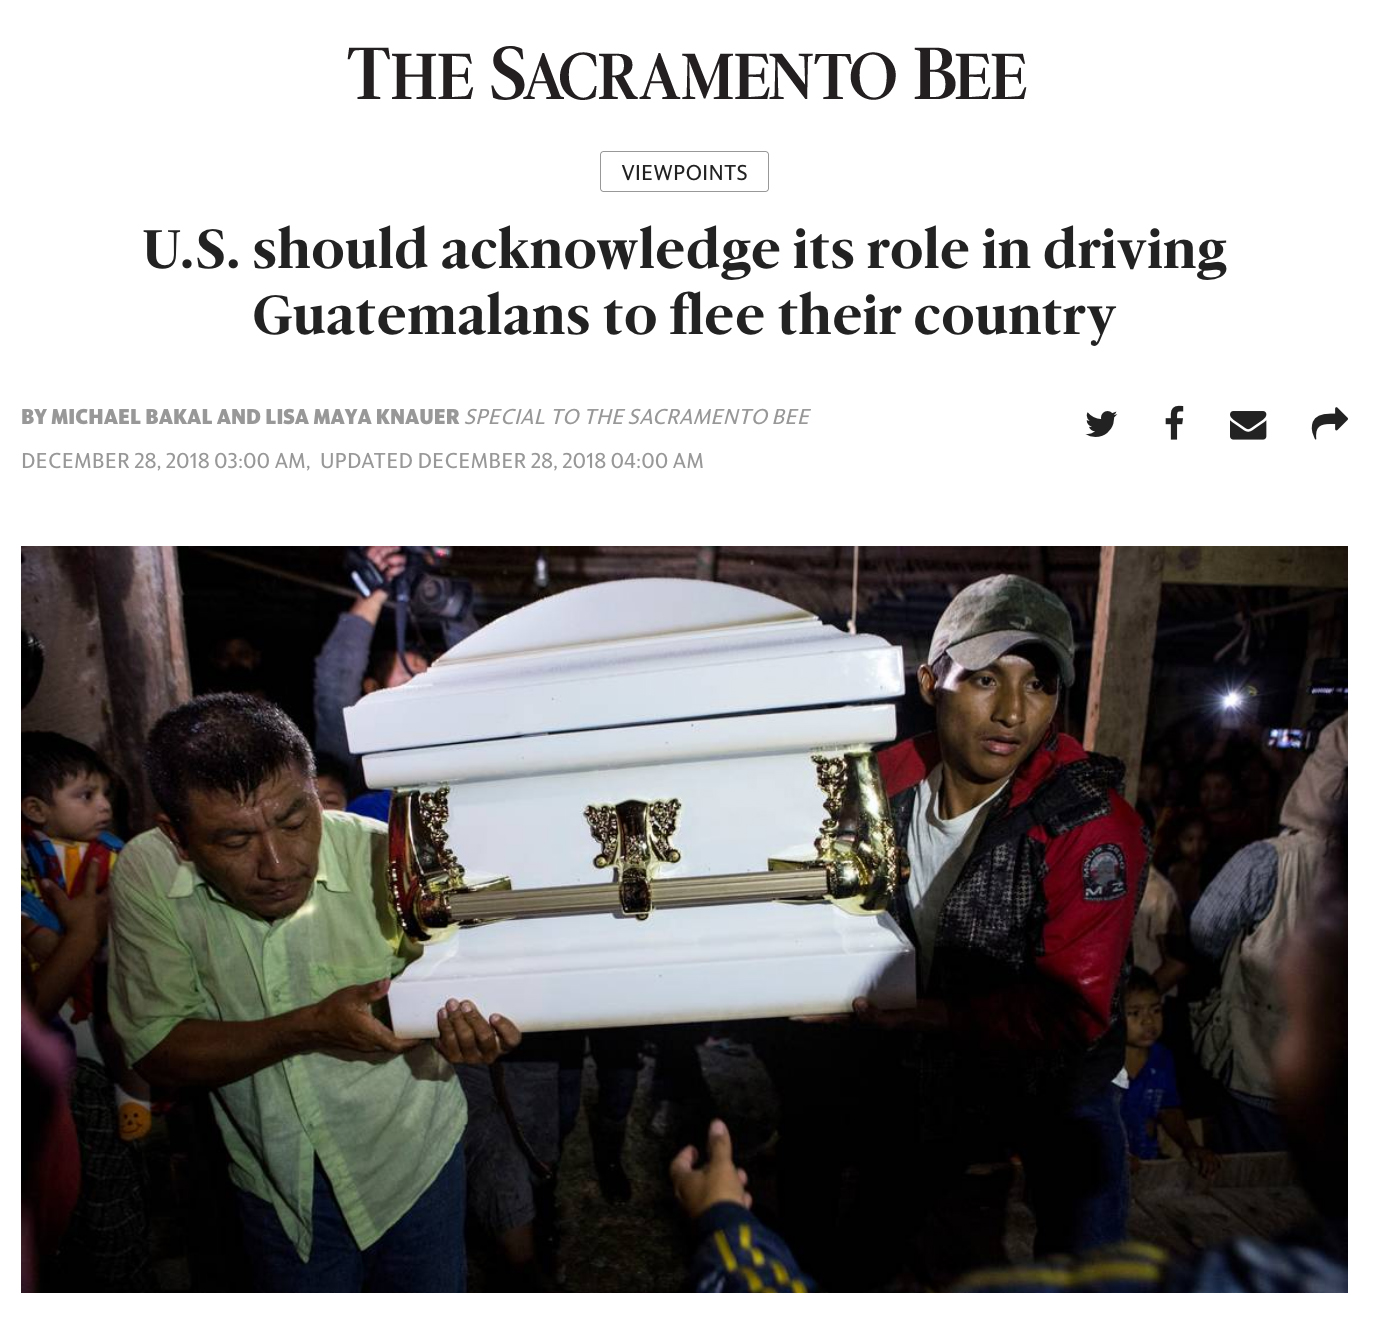 Screen grab of an op-ed by Michael Bakal and Lisa Maya Knauer, appearing in the Sacramento Bee